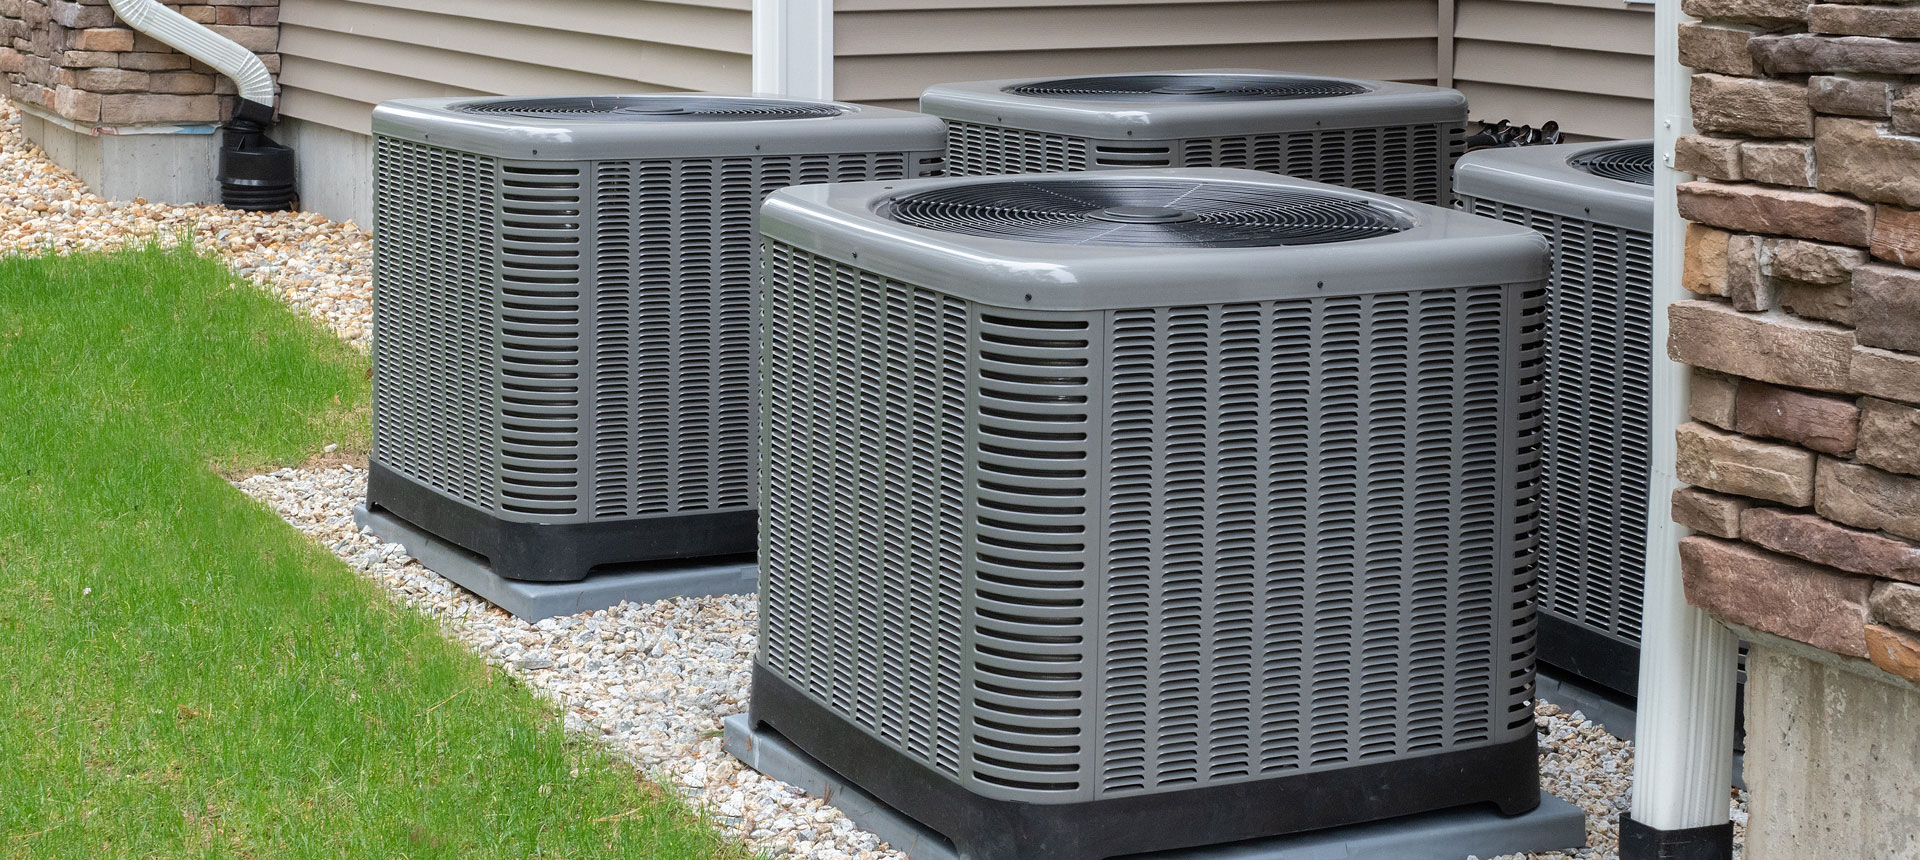 Should You Replace Your Air Conditioner Unit?